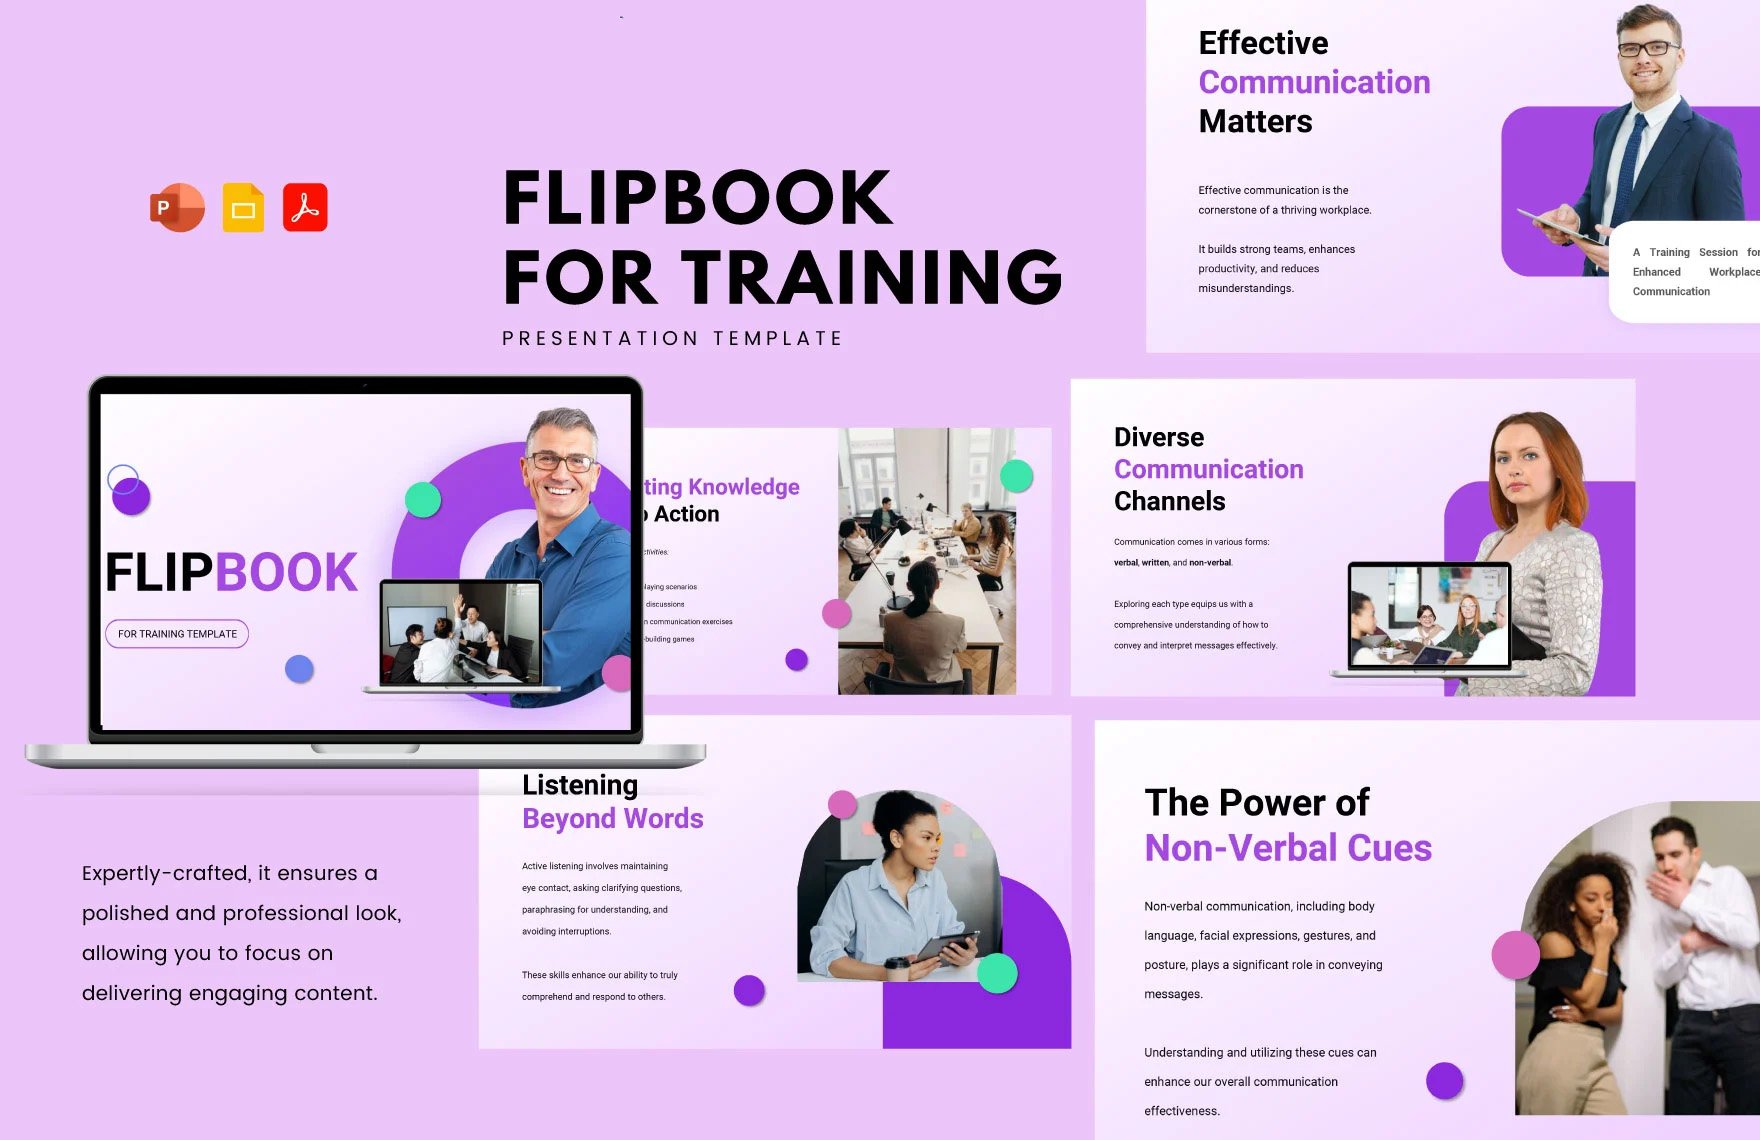 Flipbook for Training Template